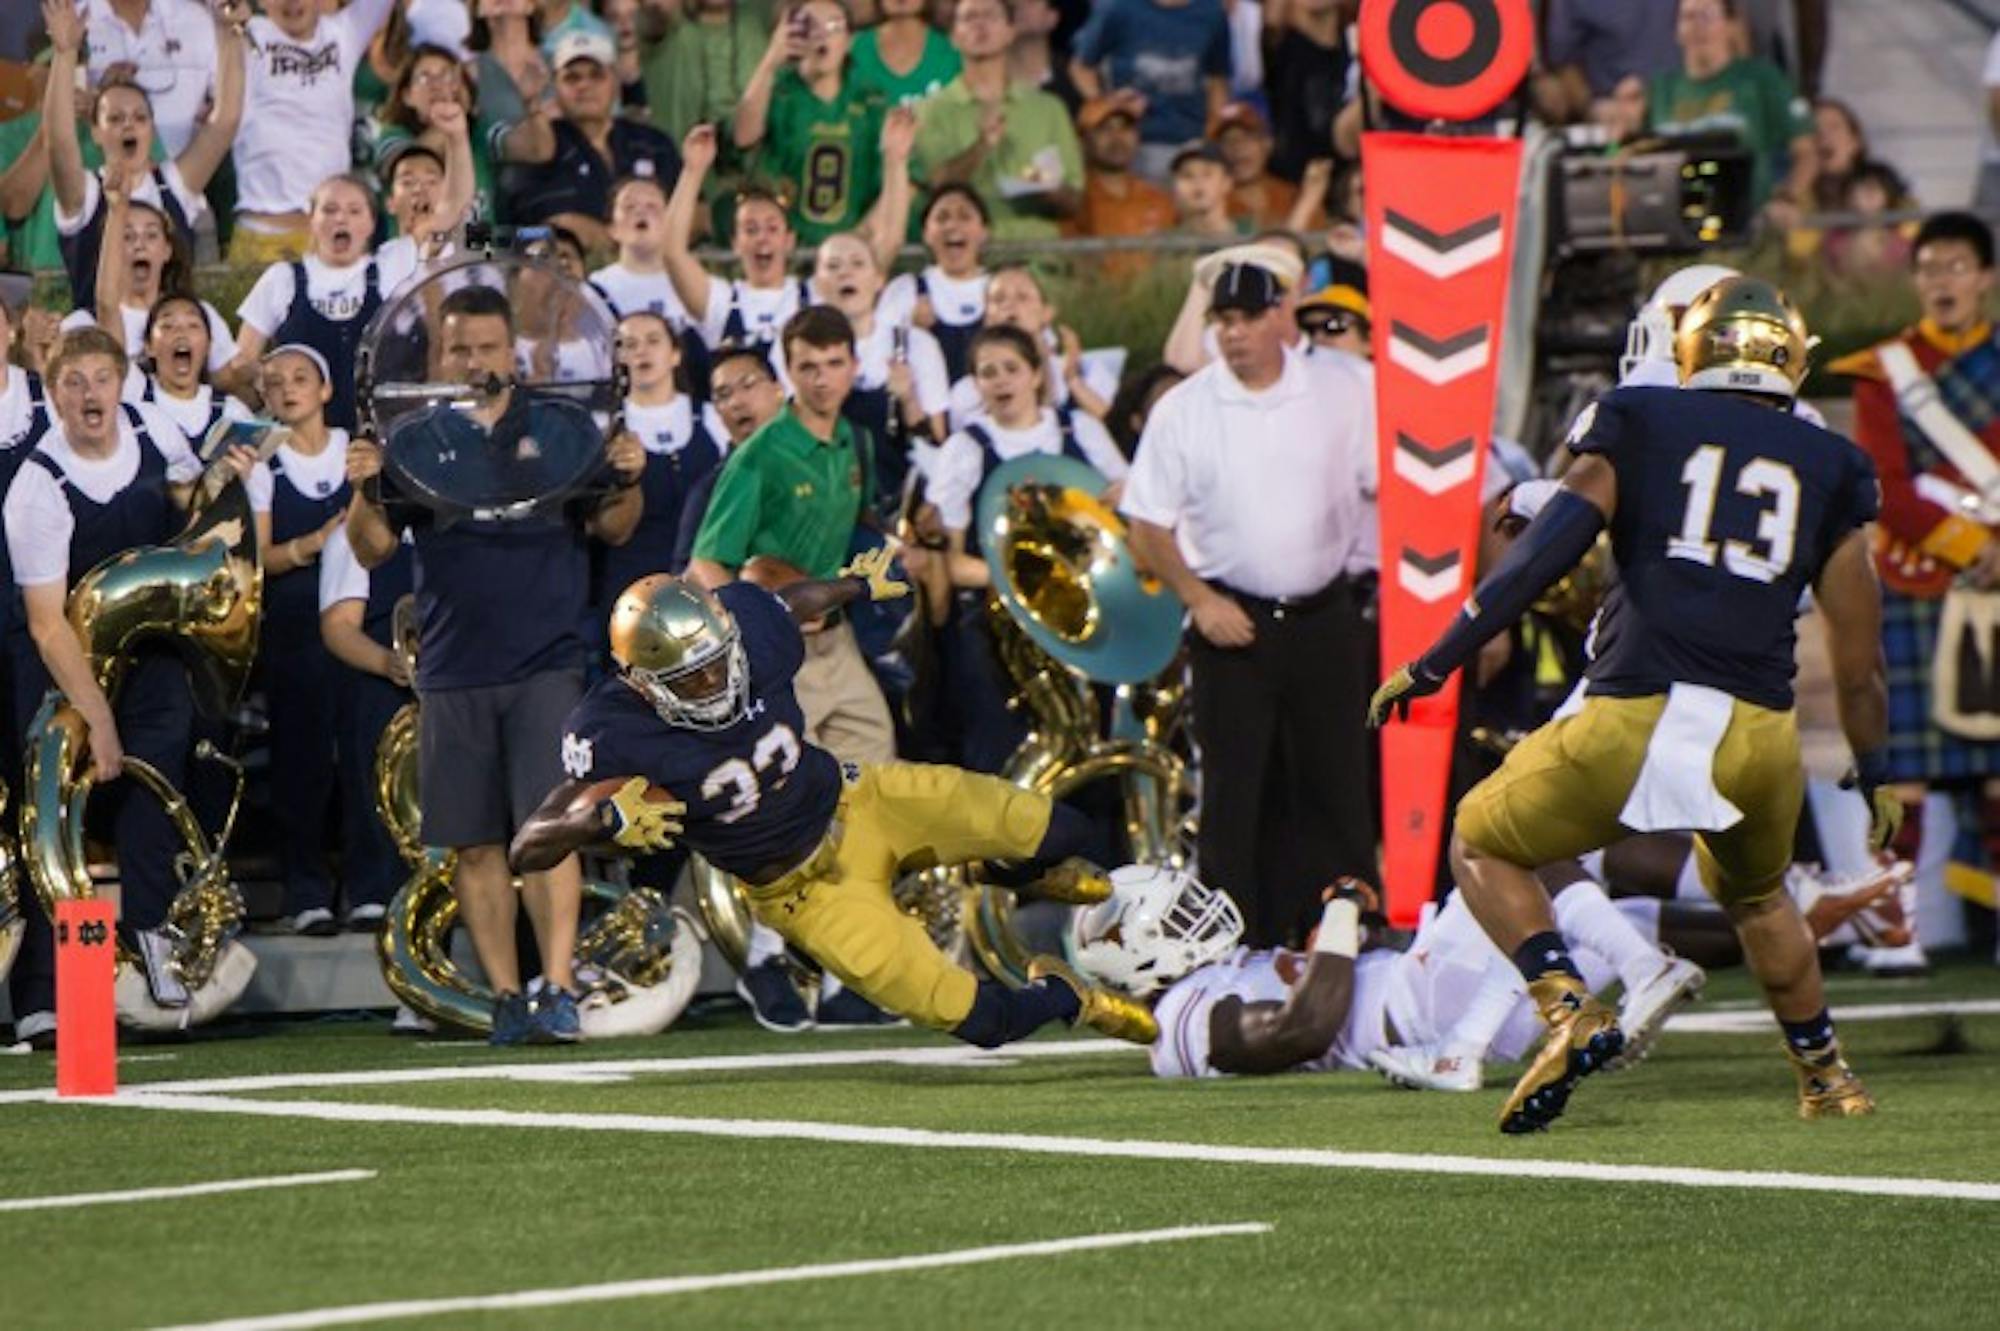 Irish freshman running back Josh Adams dives for the goal line during Notre Dame's 38-3 win over Texas on Saturday.